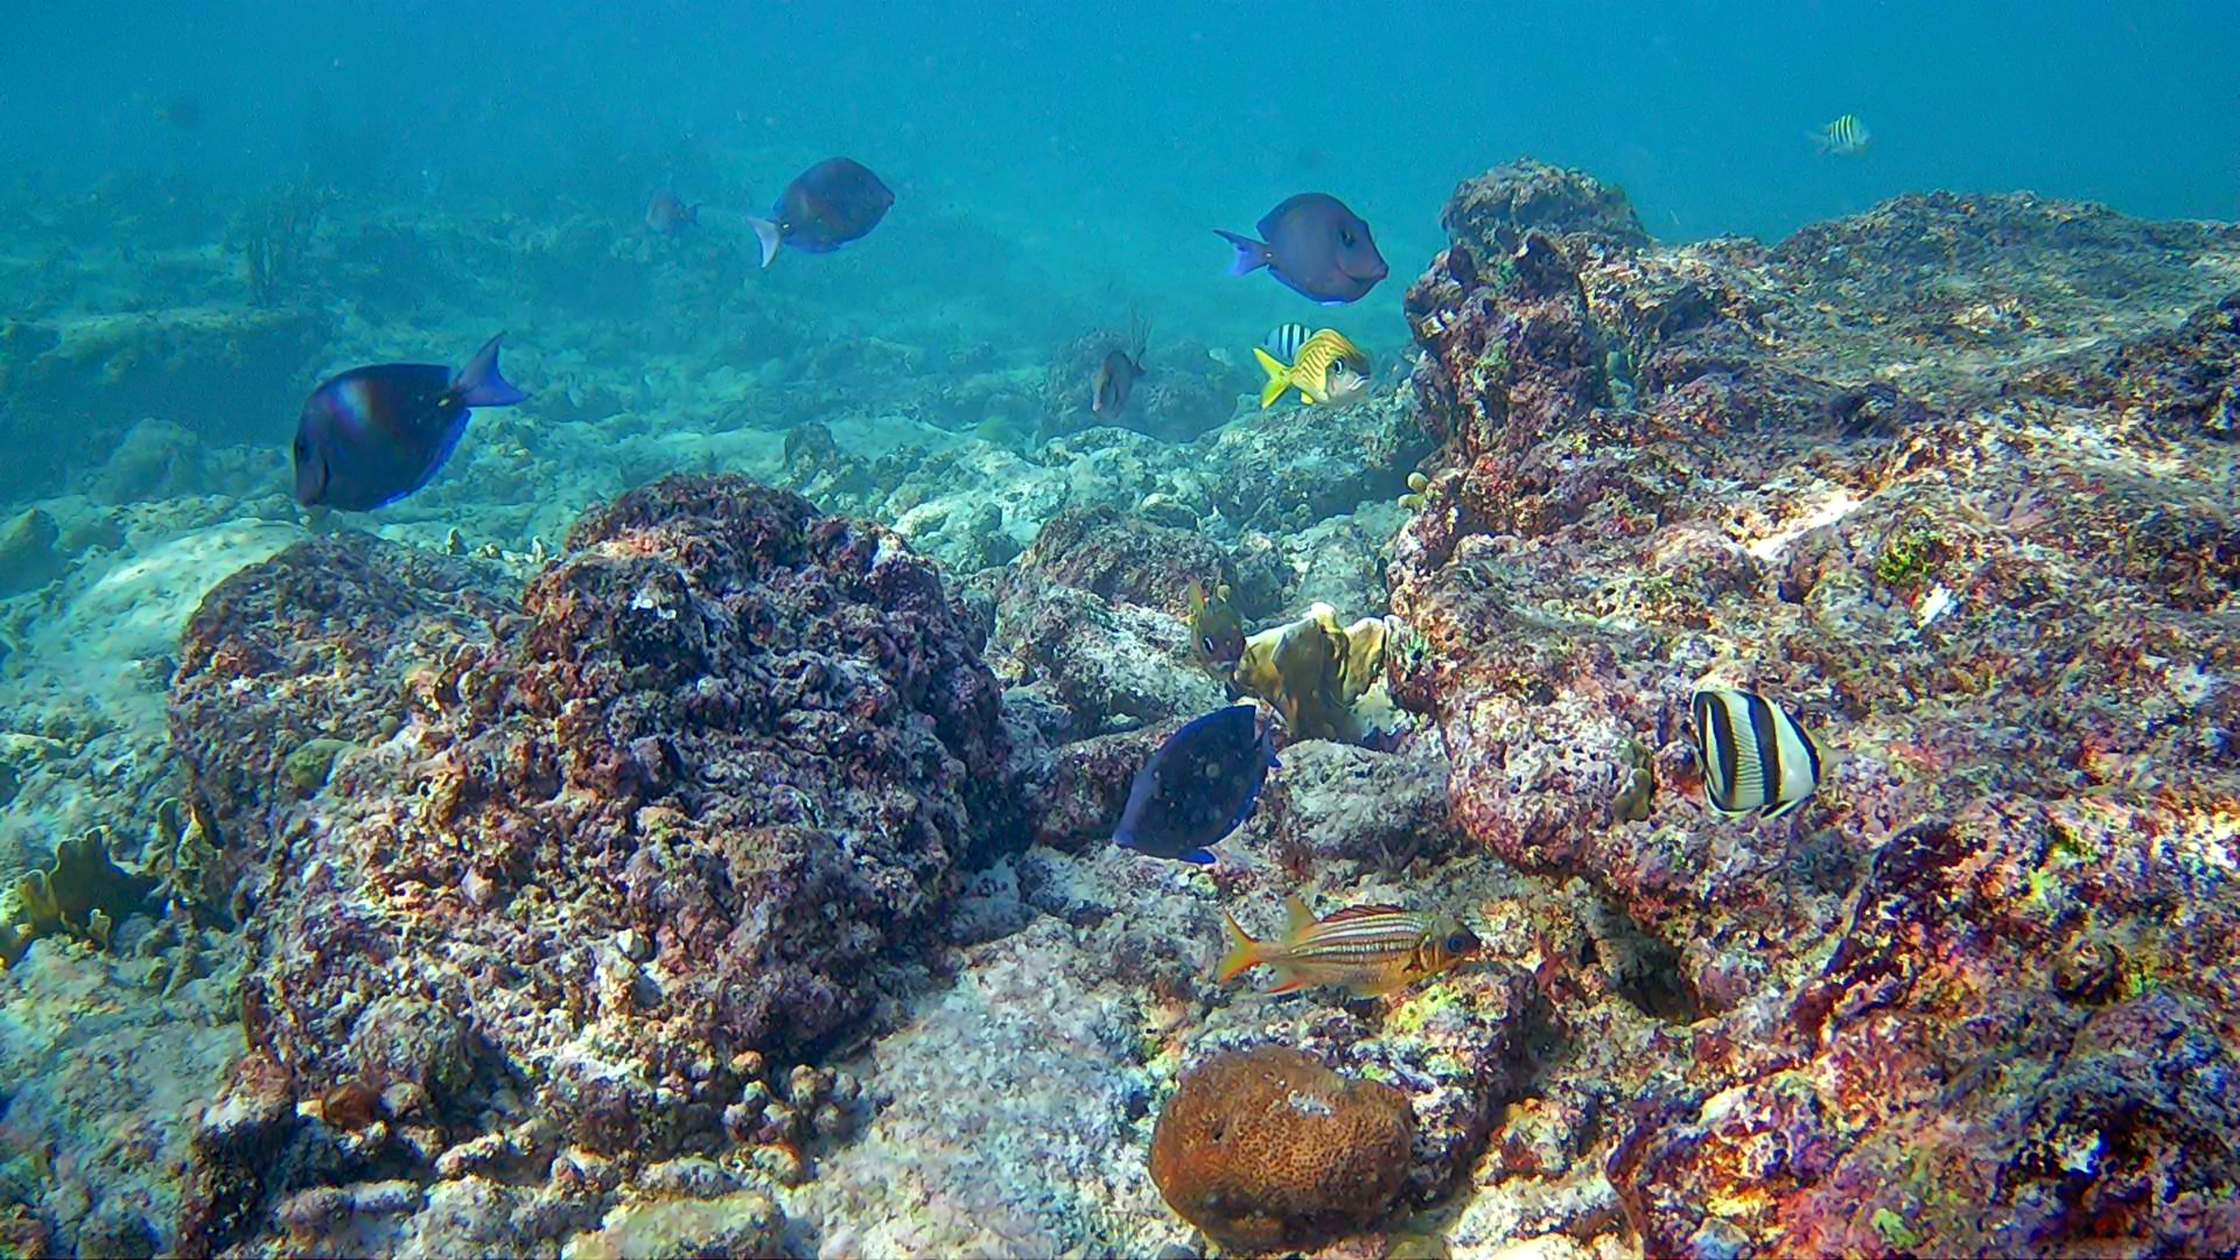 Surgeonfish, grunt and butterfly fish swimming in the reef. ( Photo credit: Bajan Digital Creations)